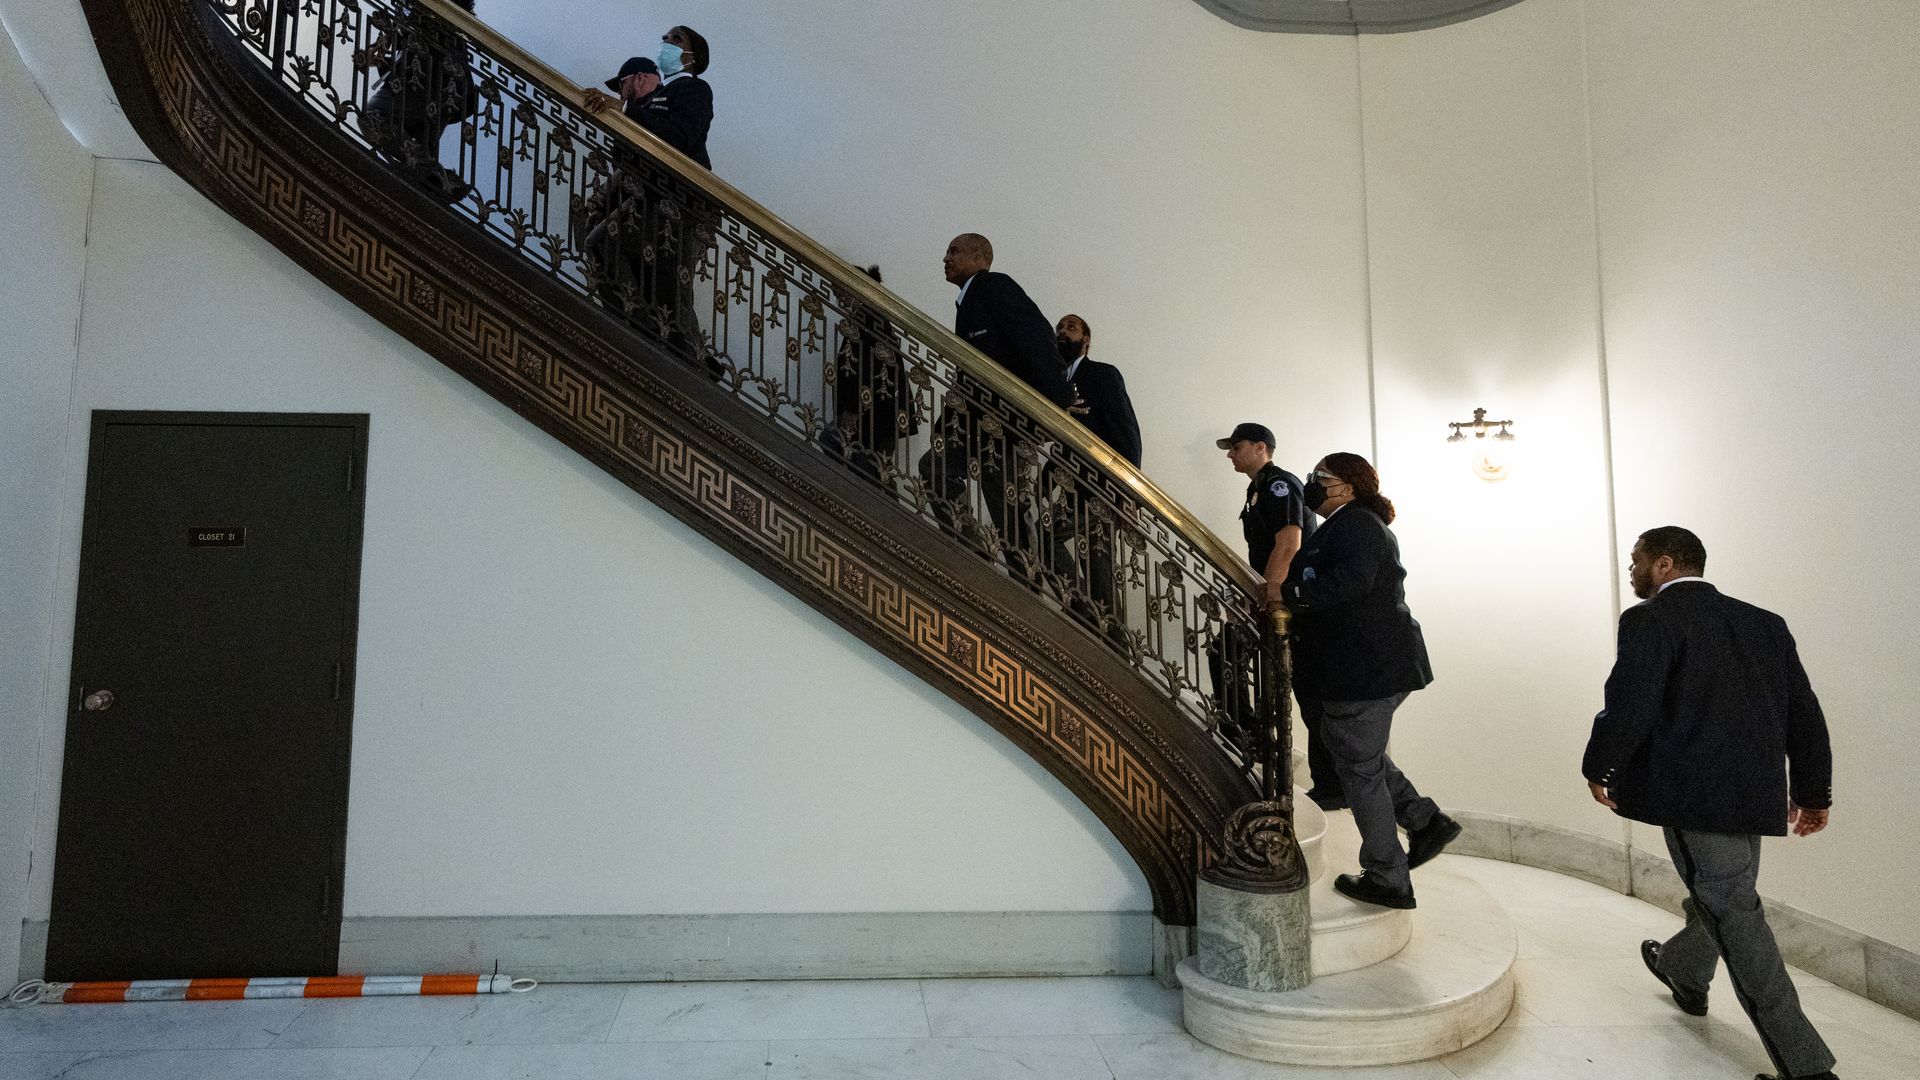 Contract security officers are seen getting a tour of the Russell Senate Office Building.